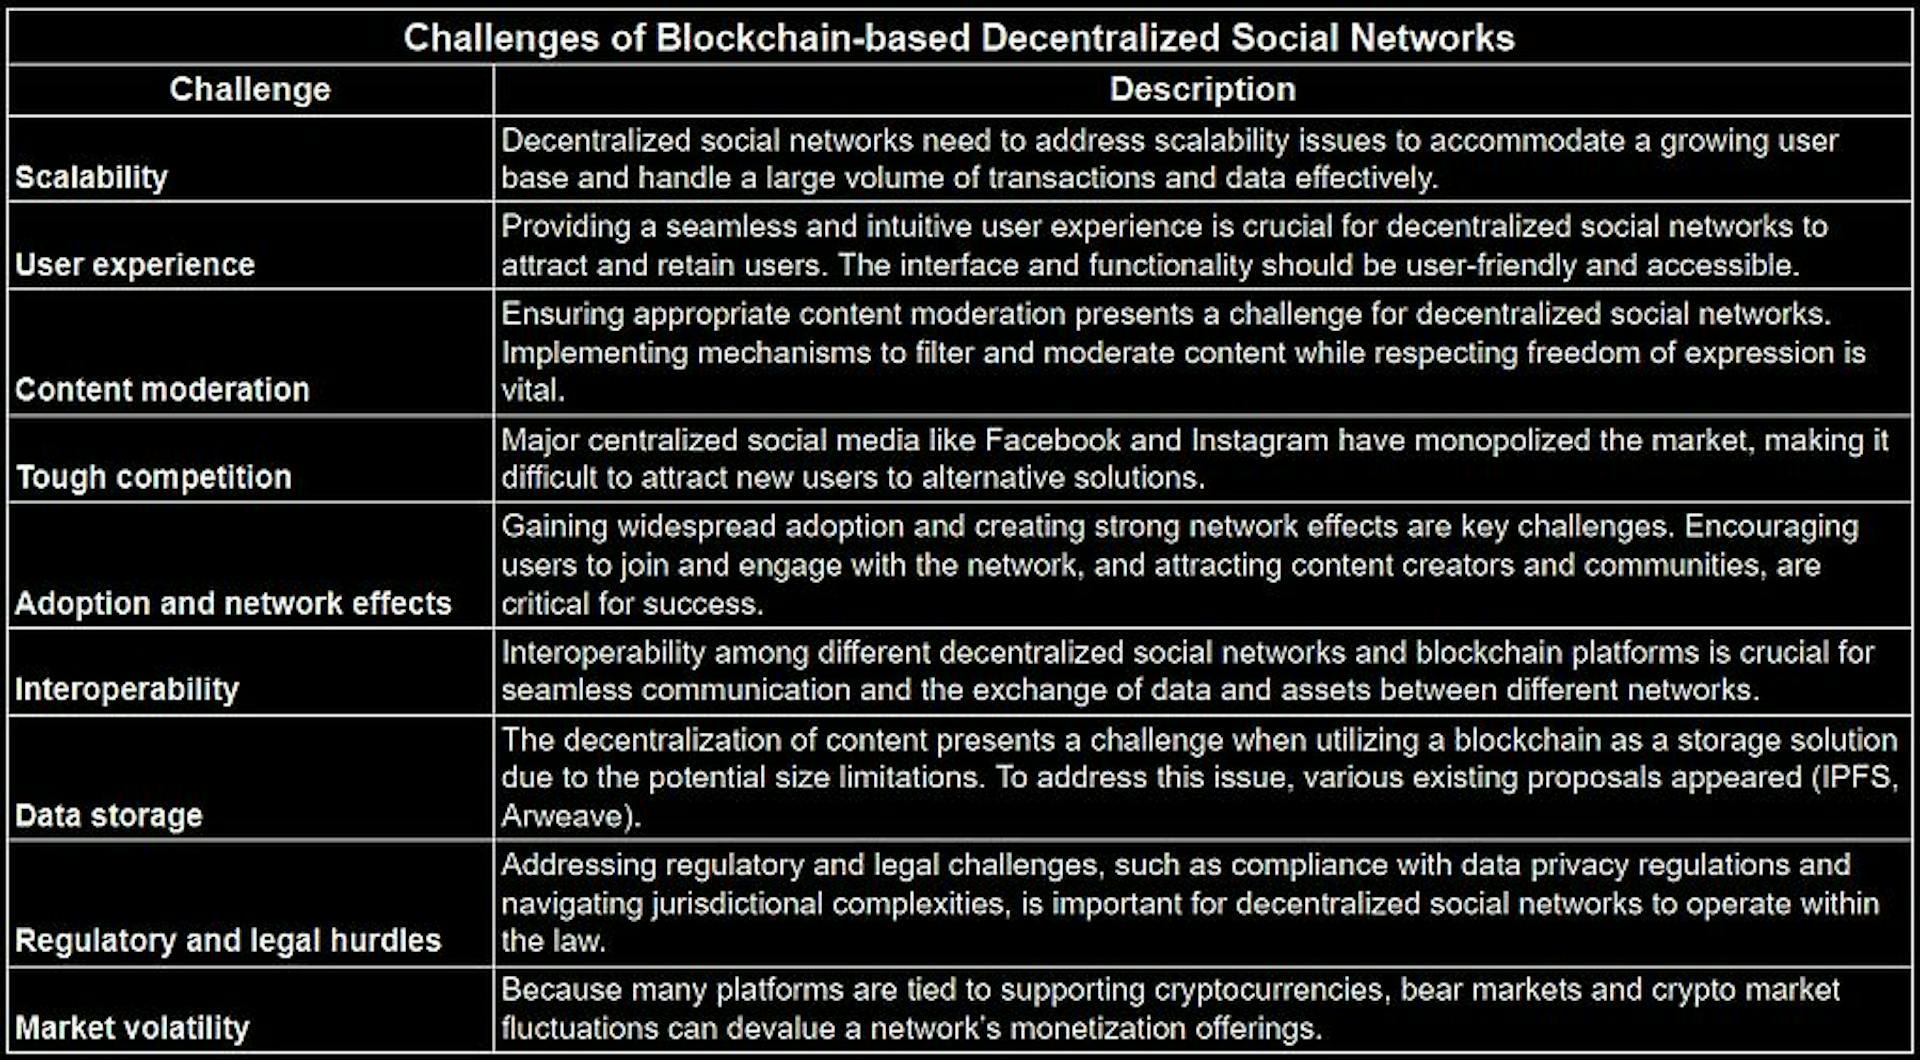 Challenges of Blockchain-based Decentralized Social Networks